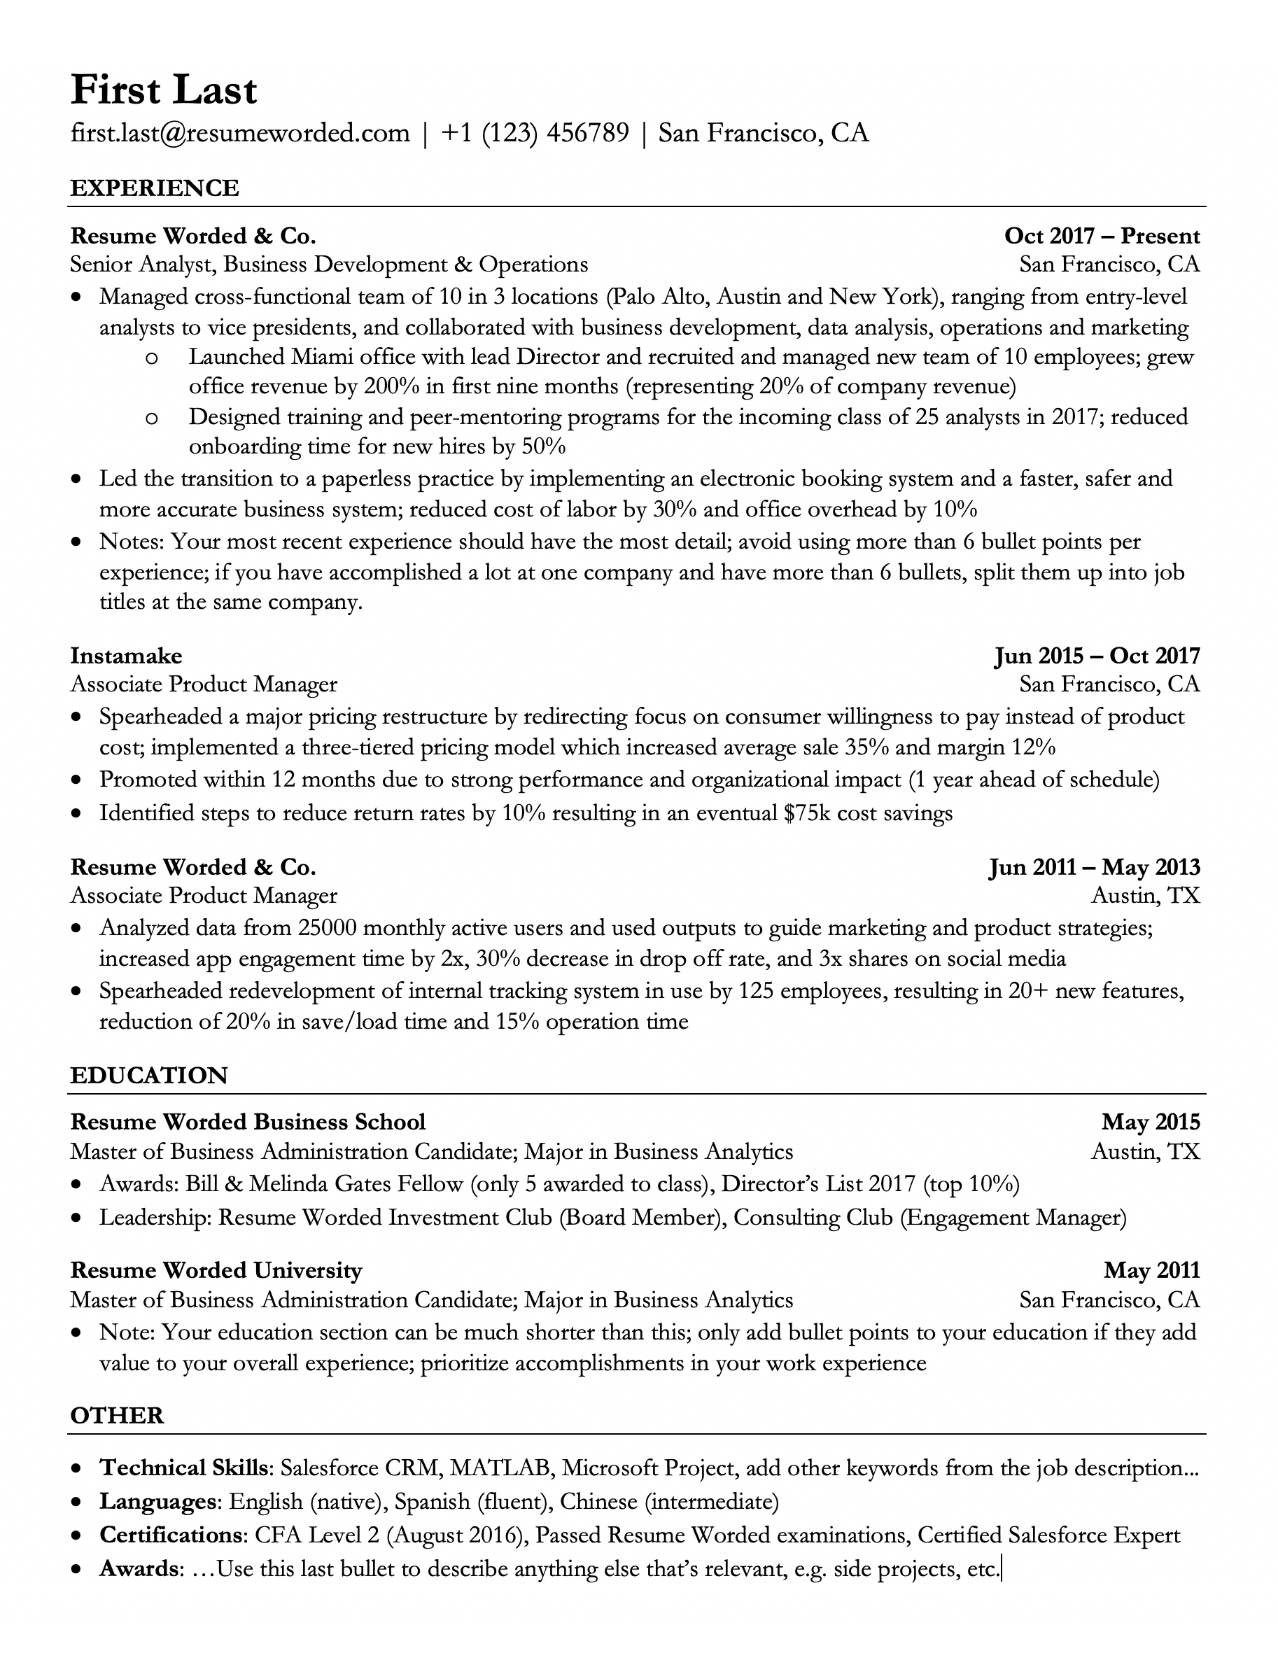 resume for your second job   55